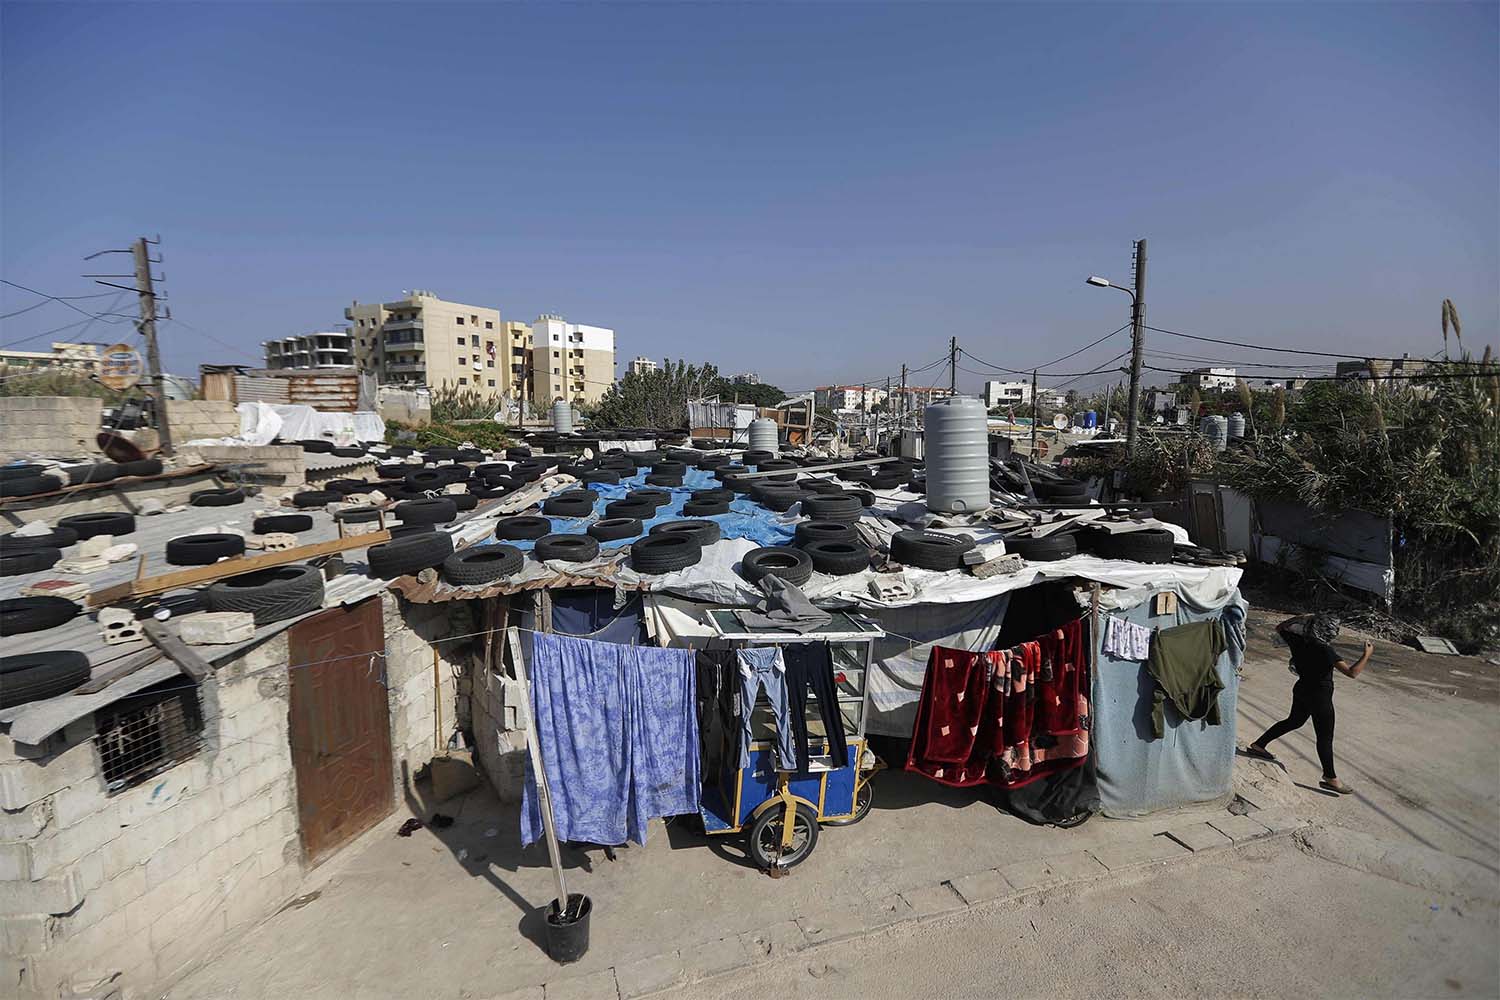 Makeshift houses are pictures in an empoverished neighbourhood in al-Mani area of the port city of Tripoli